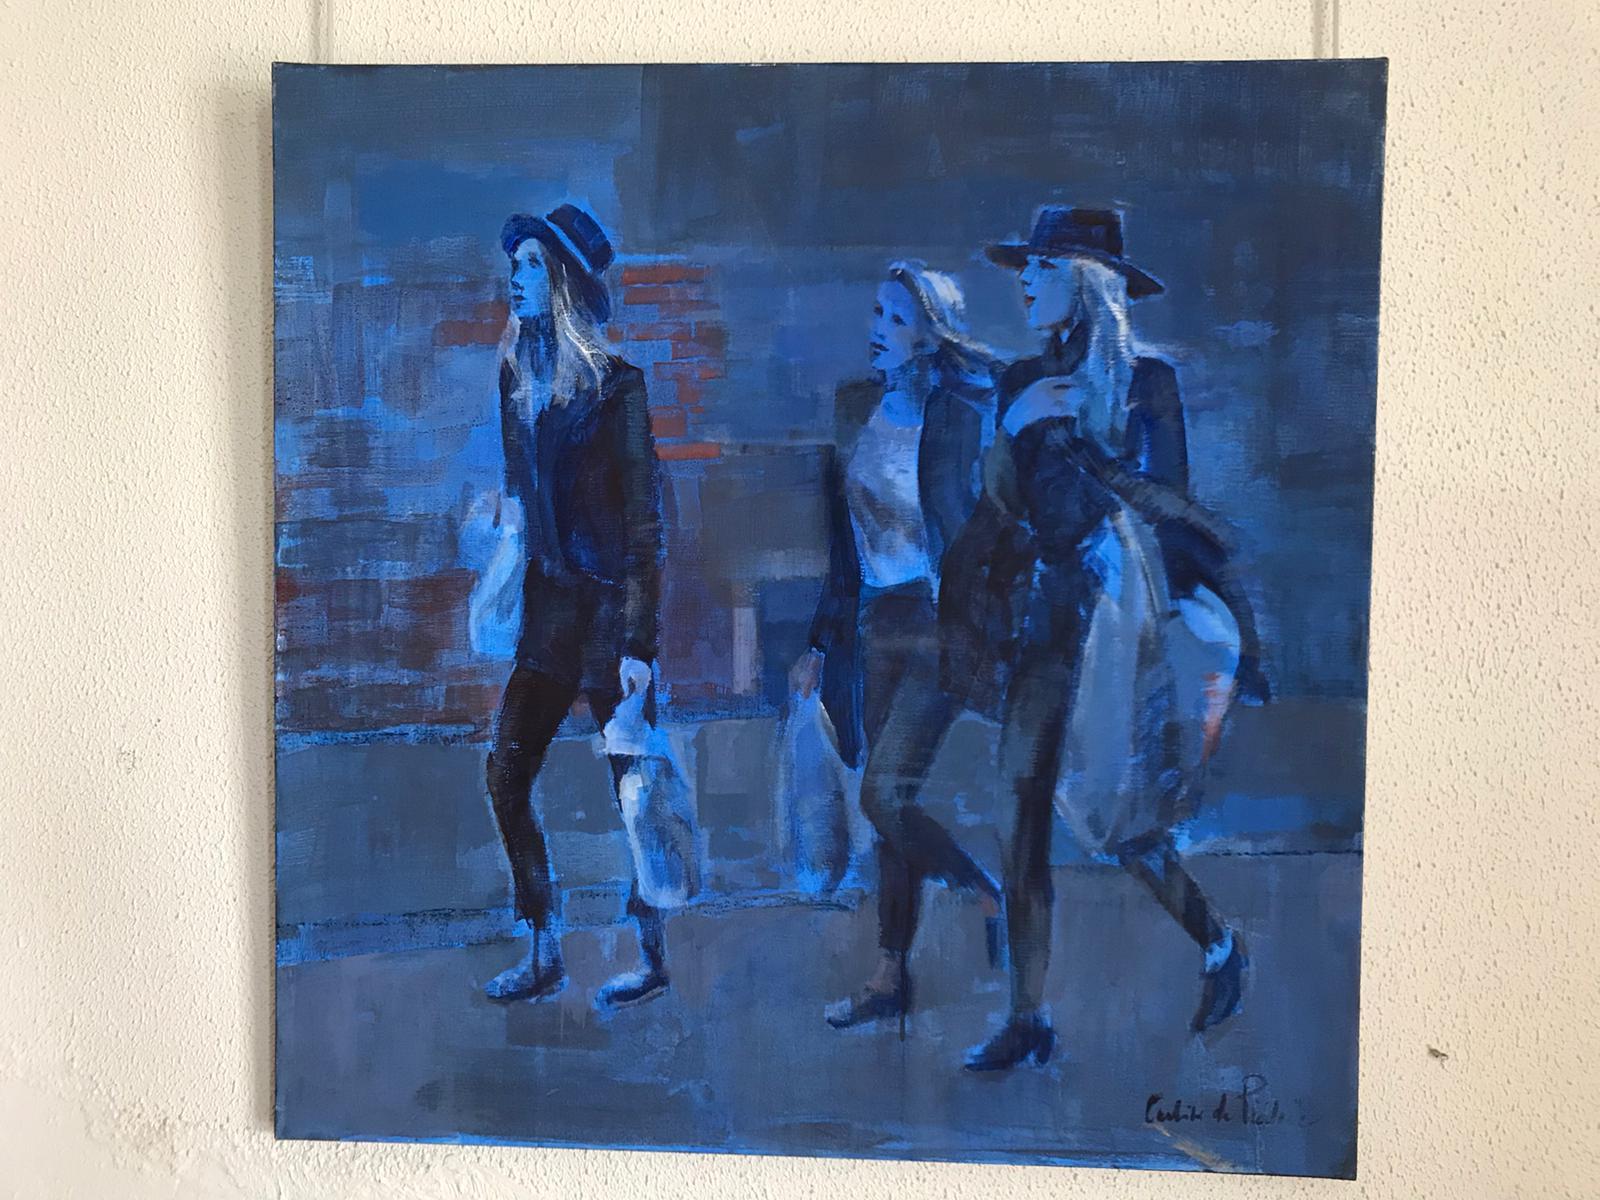 French Contemporary Art by Caroline de Piedoue - 3 Girls on a Street       For Sale 1